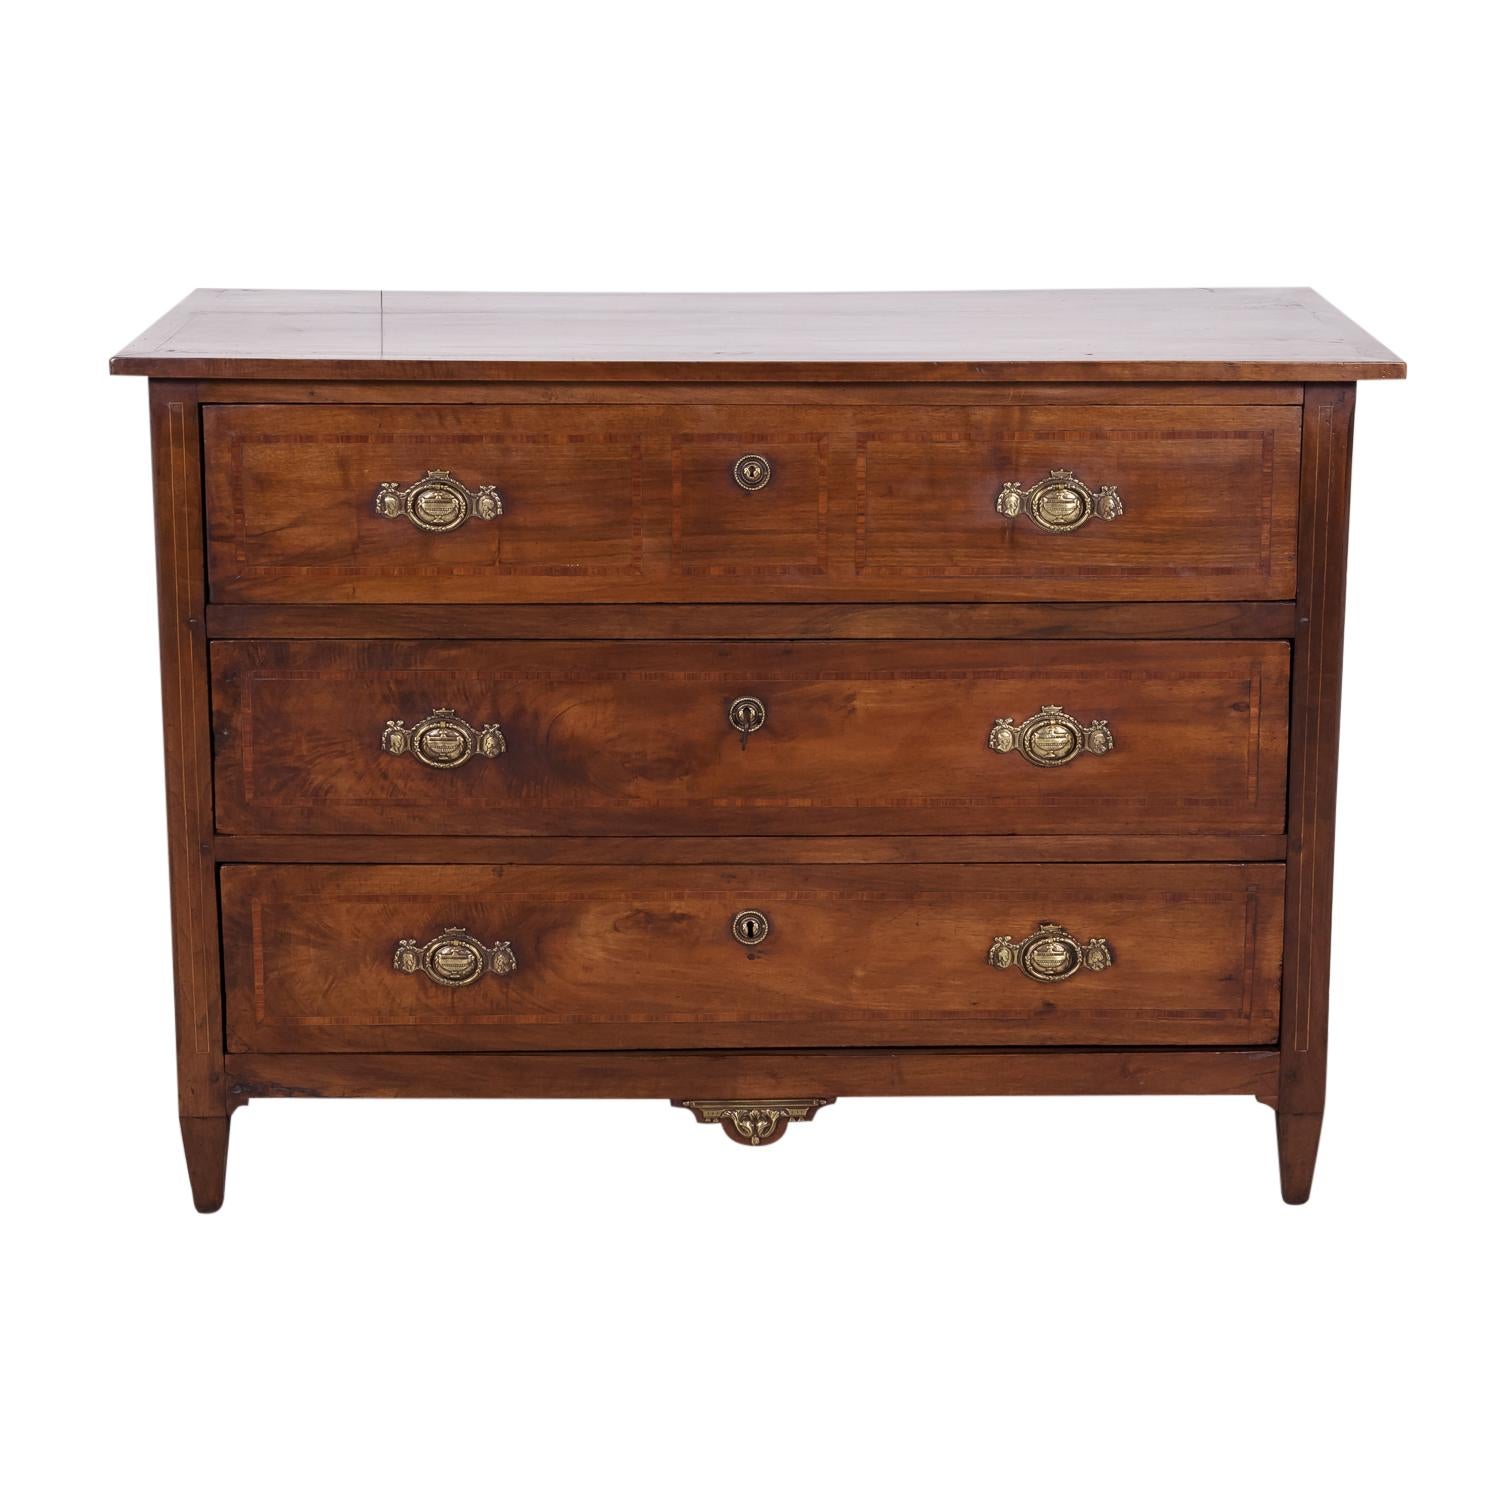 French 18th Century Period Louis XVI Walnut and Parquetry Commode